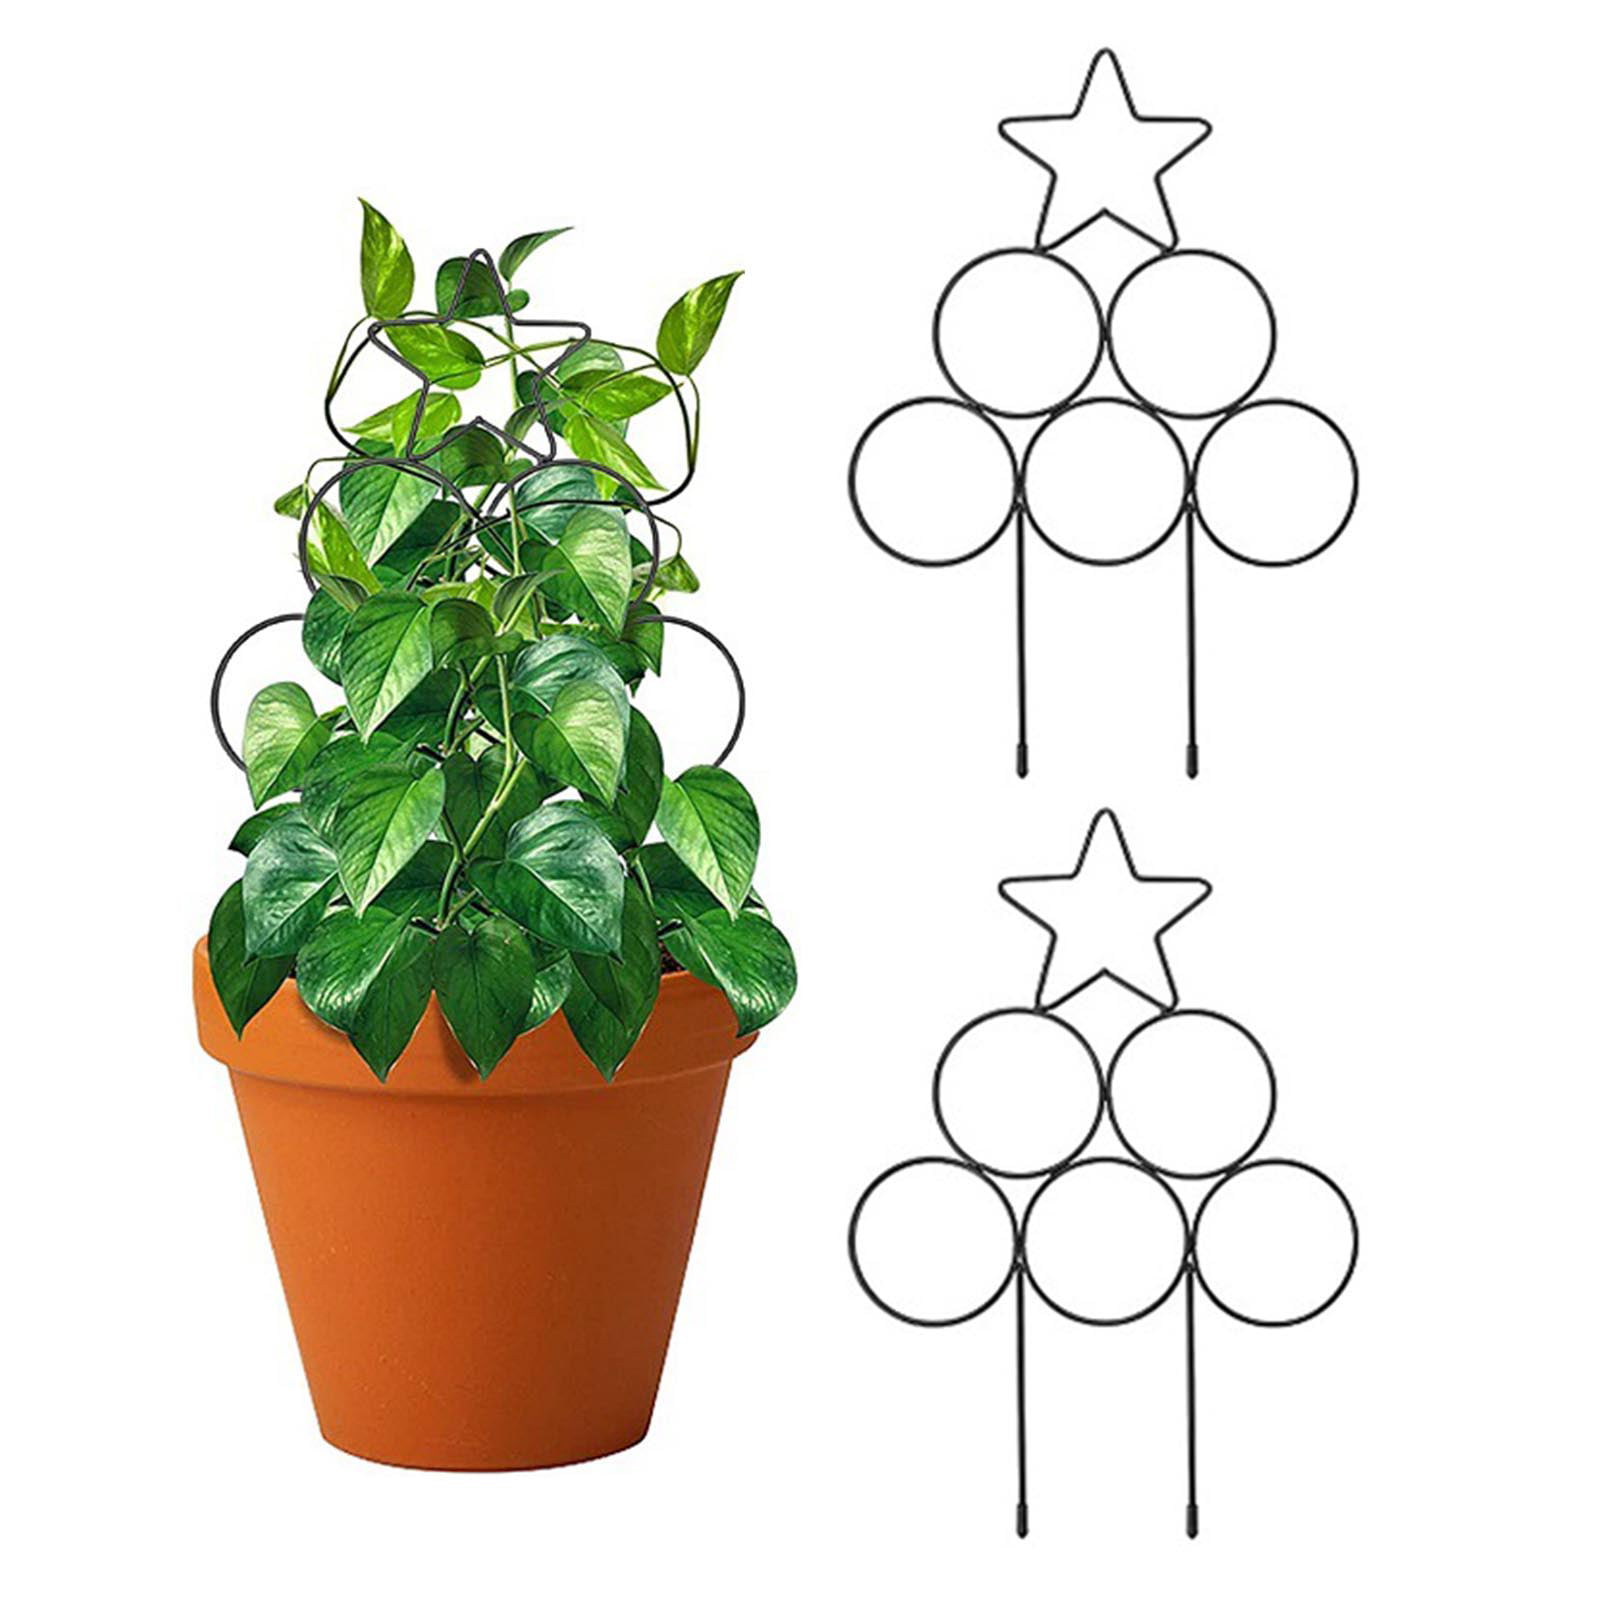 Details about   Garden Plant Vines Support Stand Pot Stand For Houseplant Trellis Frame DIY 